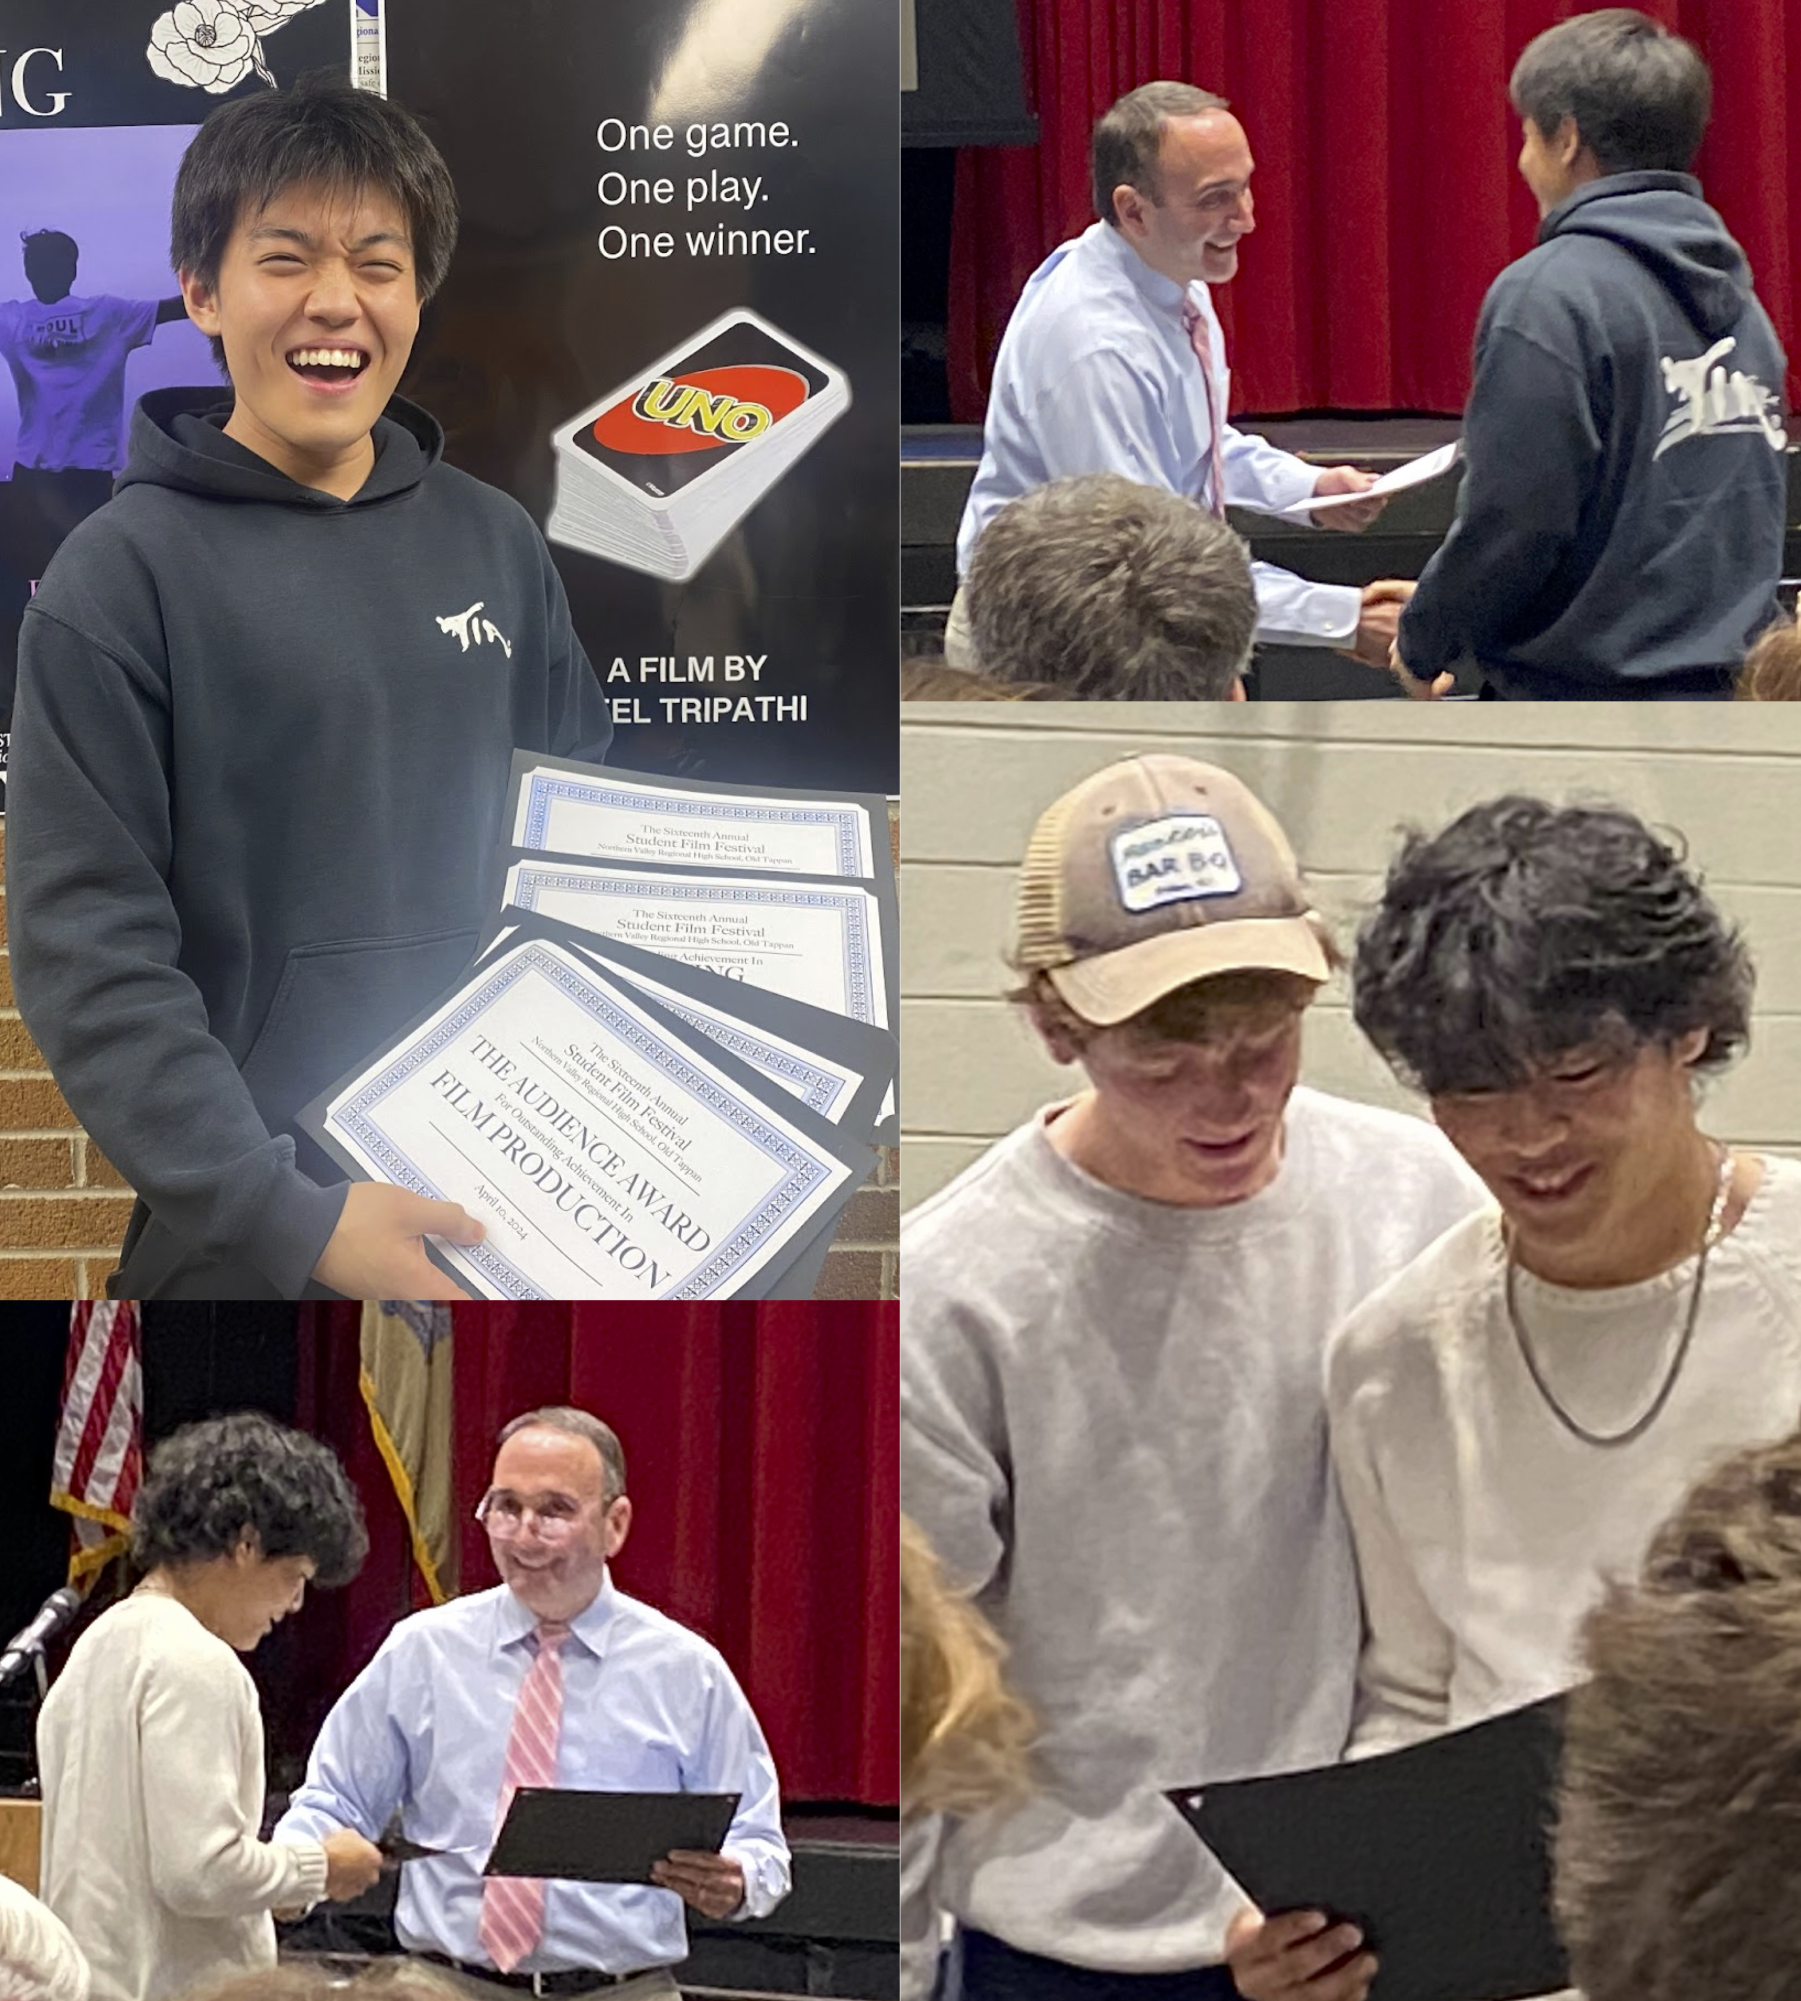 Top Left: Andrew Kim shares a moment of pride with his four awards for his film Loving Rue.
Top Right: Film Studies teacher John Housley presents an award to Kim.
Bottom Left: Keonho Timothy Lee goes up to receive an award for his and Roman Gattis film Eyes on the Hill.
Bottom Right: Gatti and Lee react to their award.